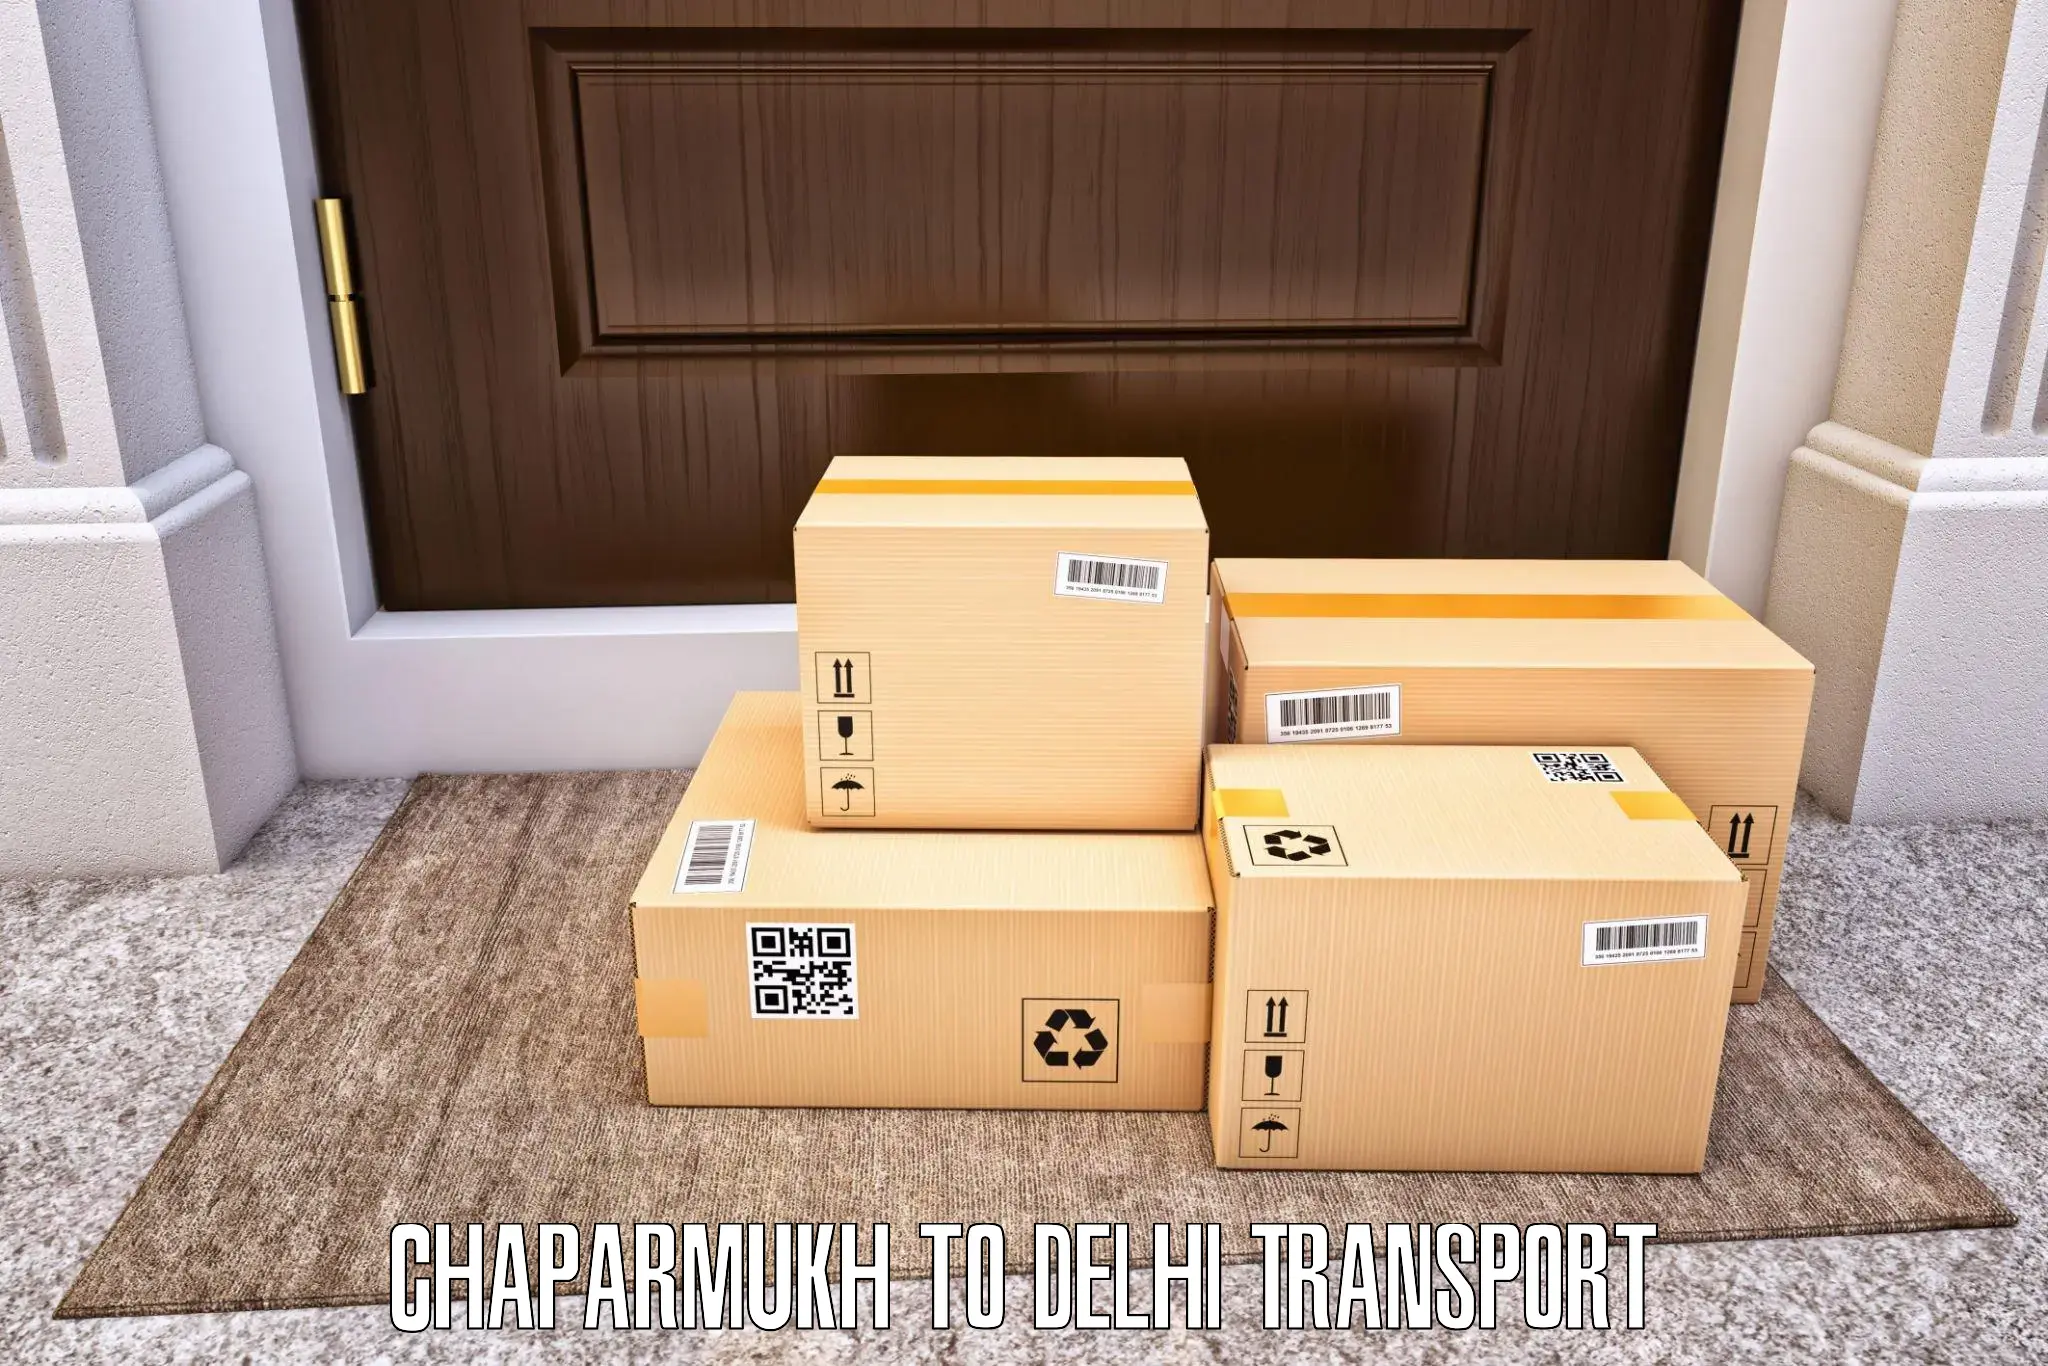 Online transport service Chaparmukh to Lodhi Road